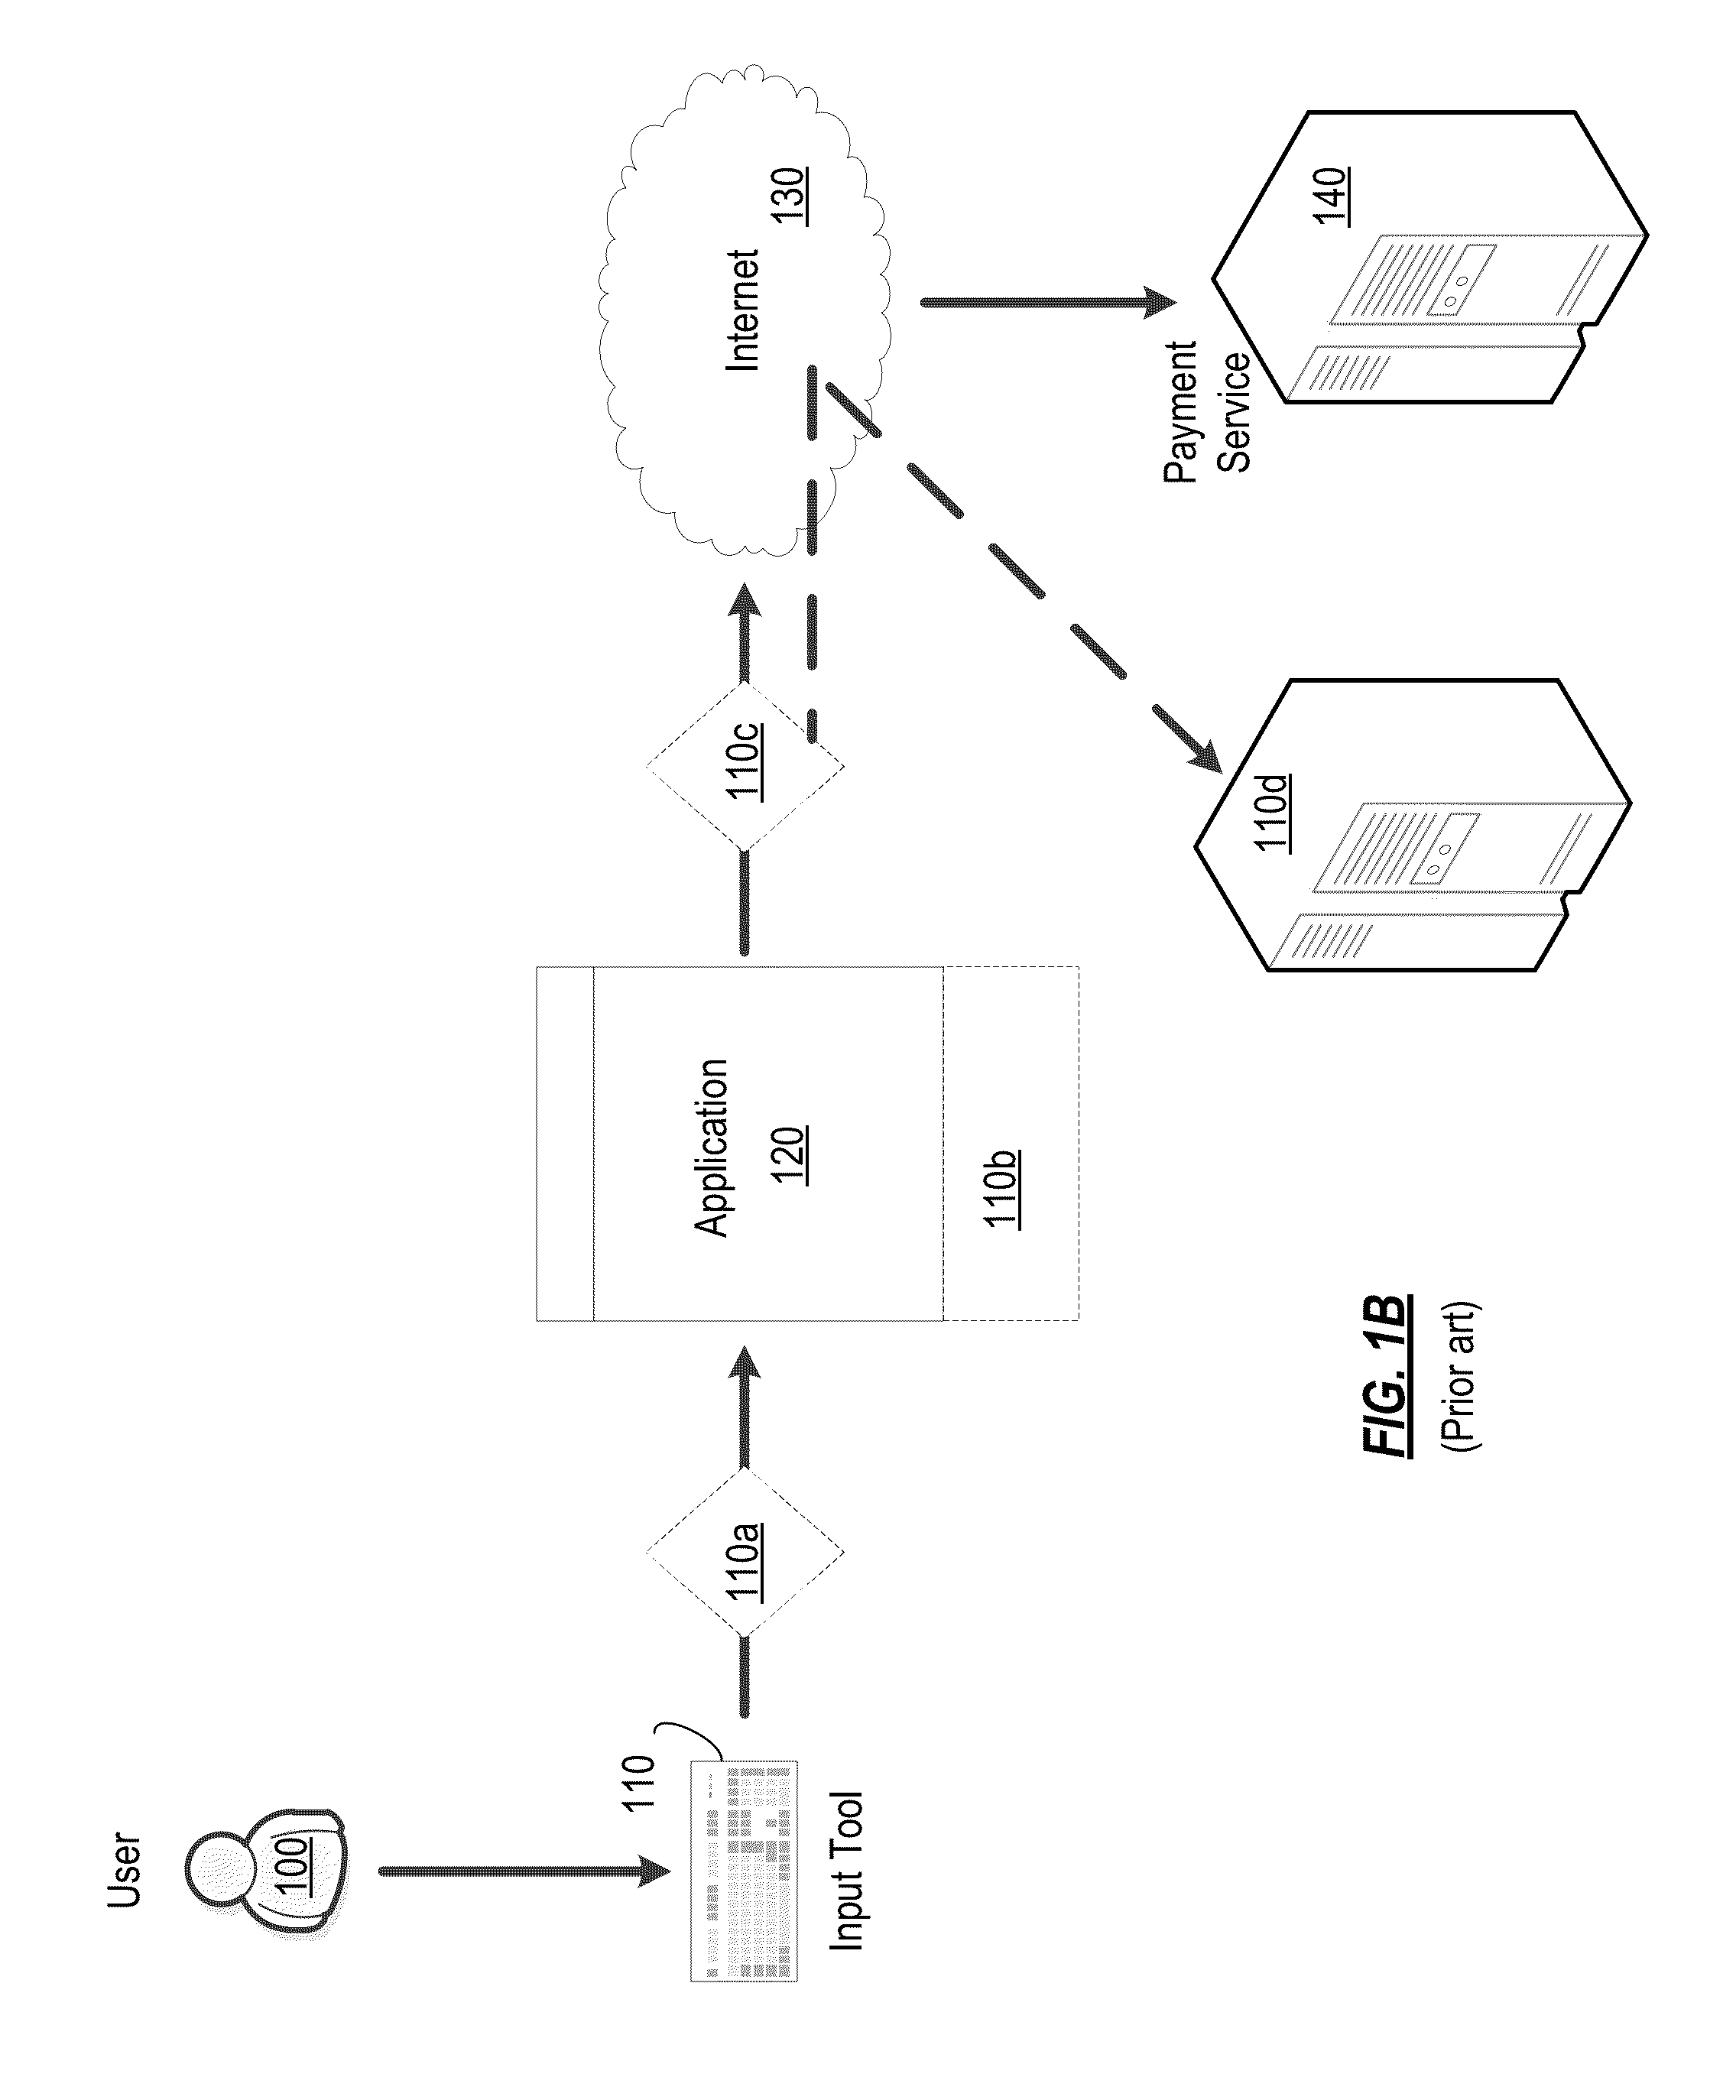 System and method for ensuring safety of online transactions